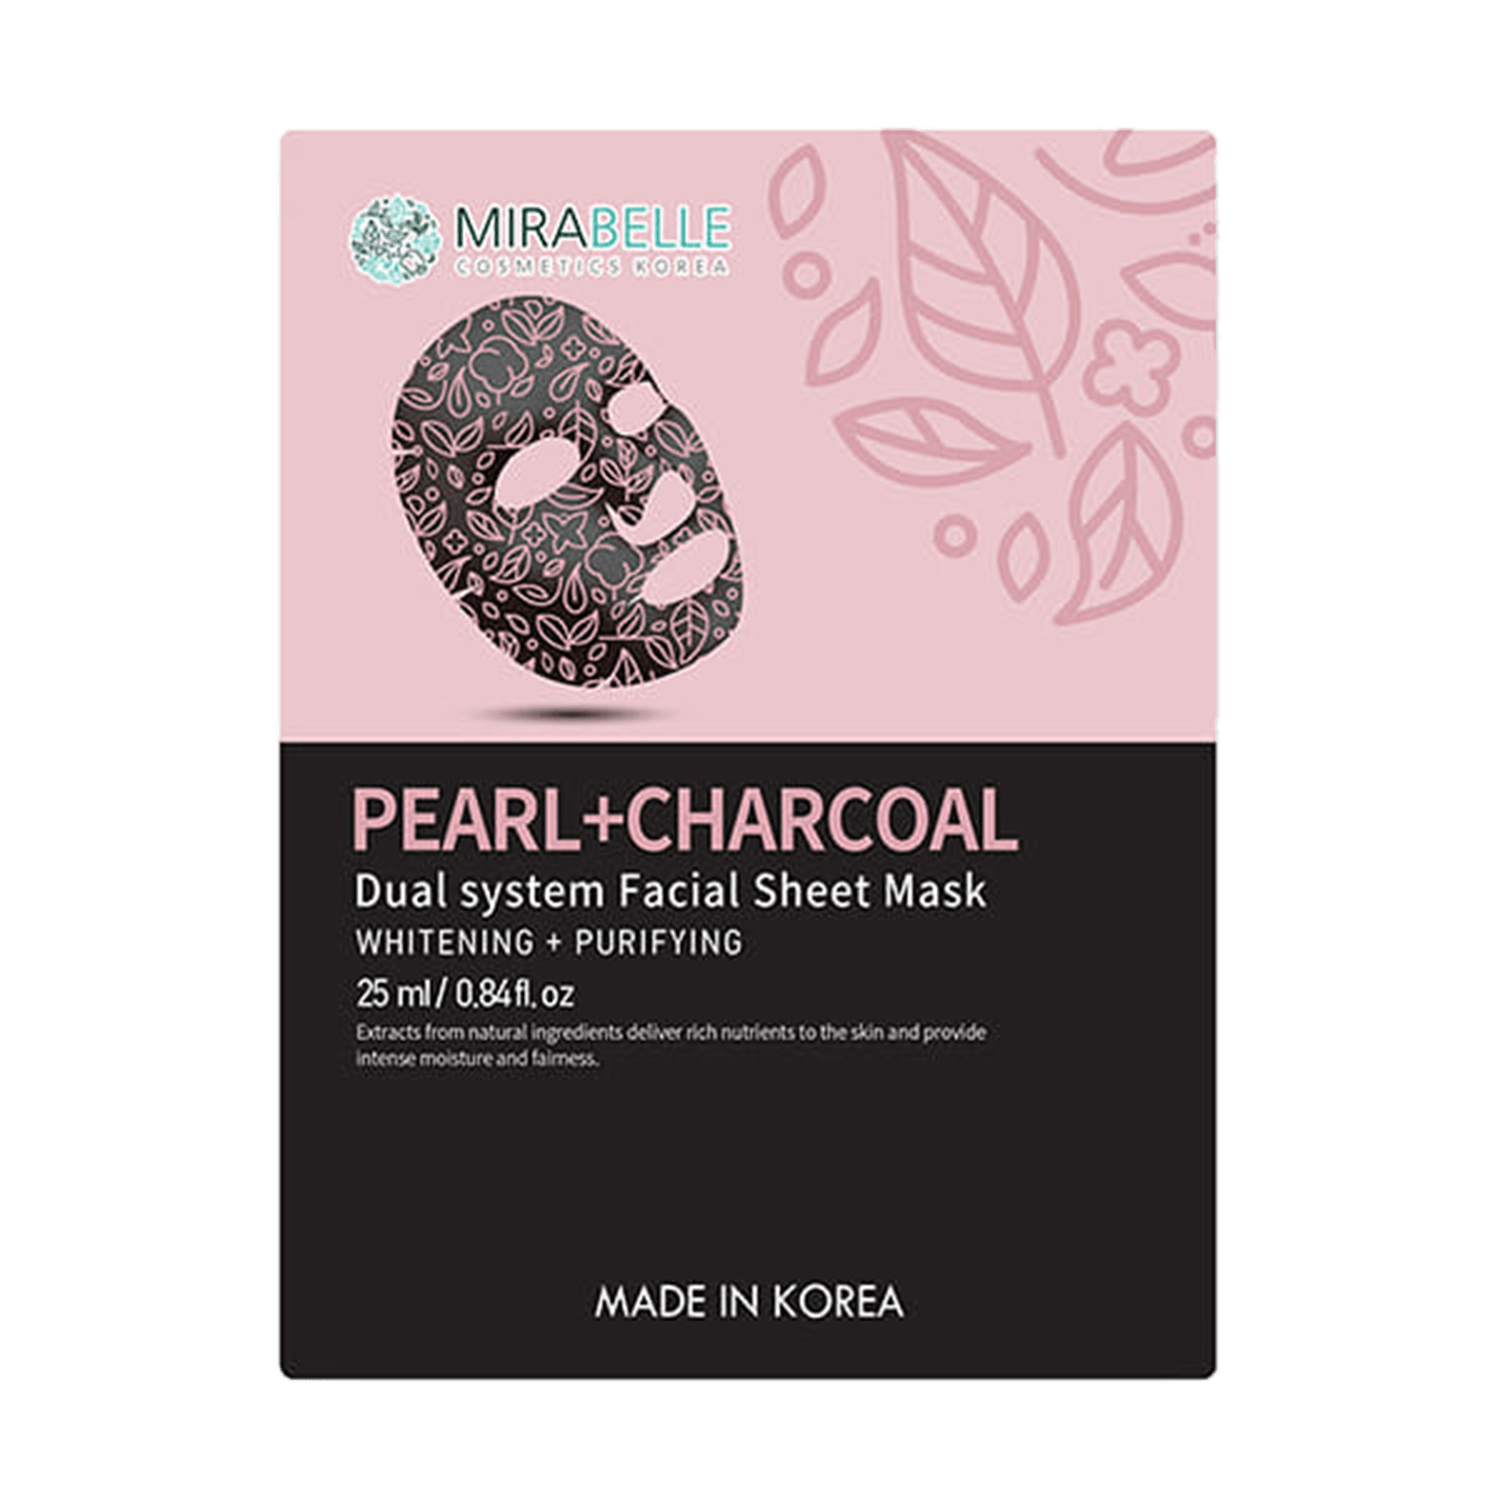 Mirabelle Cosmetics Korea Pearl And Charcoal Dual System Facial Sheet Mask (25ml)